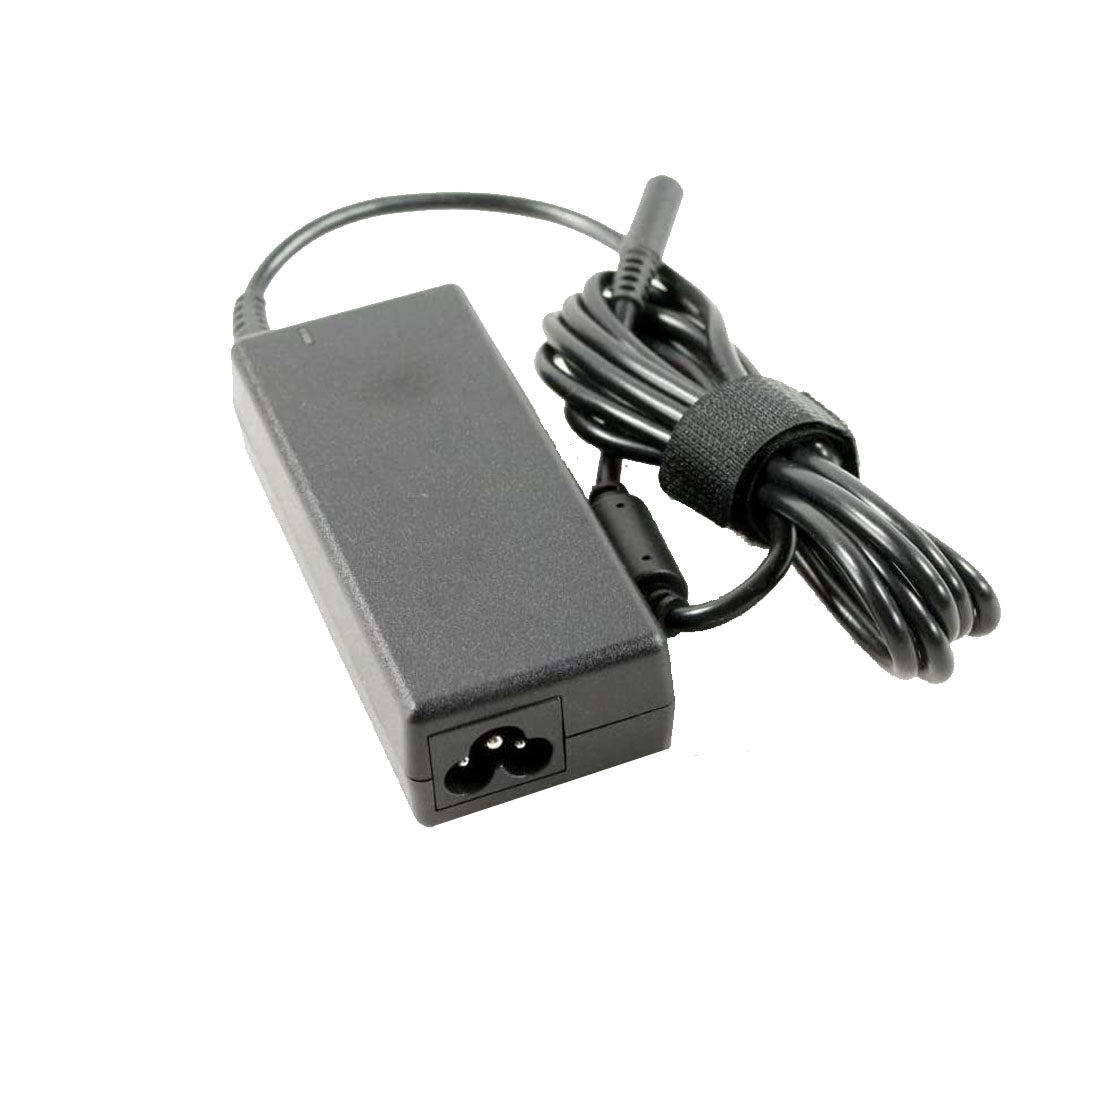 Dell Original 65W 19.5V 4.5mm Pin Laptop Charger Adapter for Inspiron 17 5755 With Power Cord